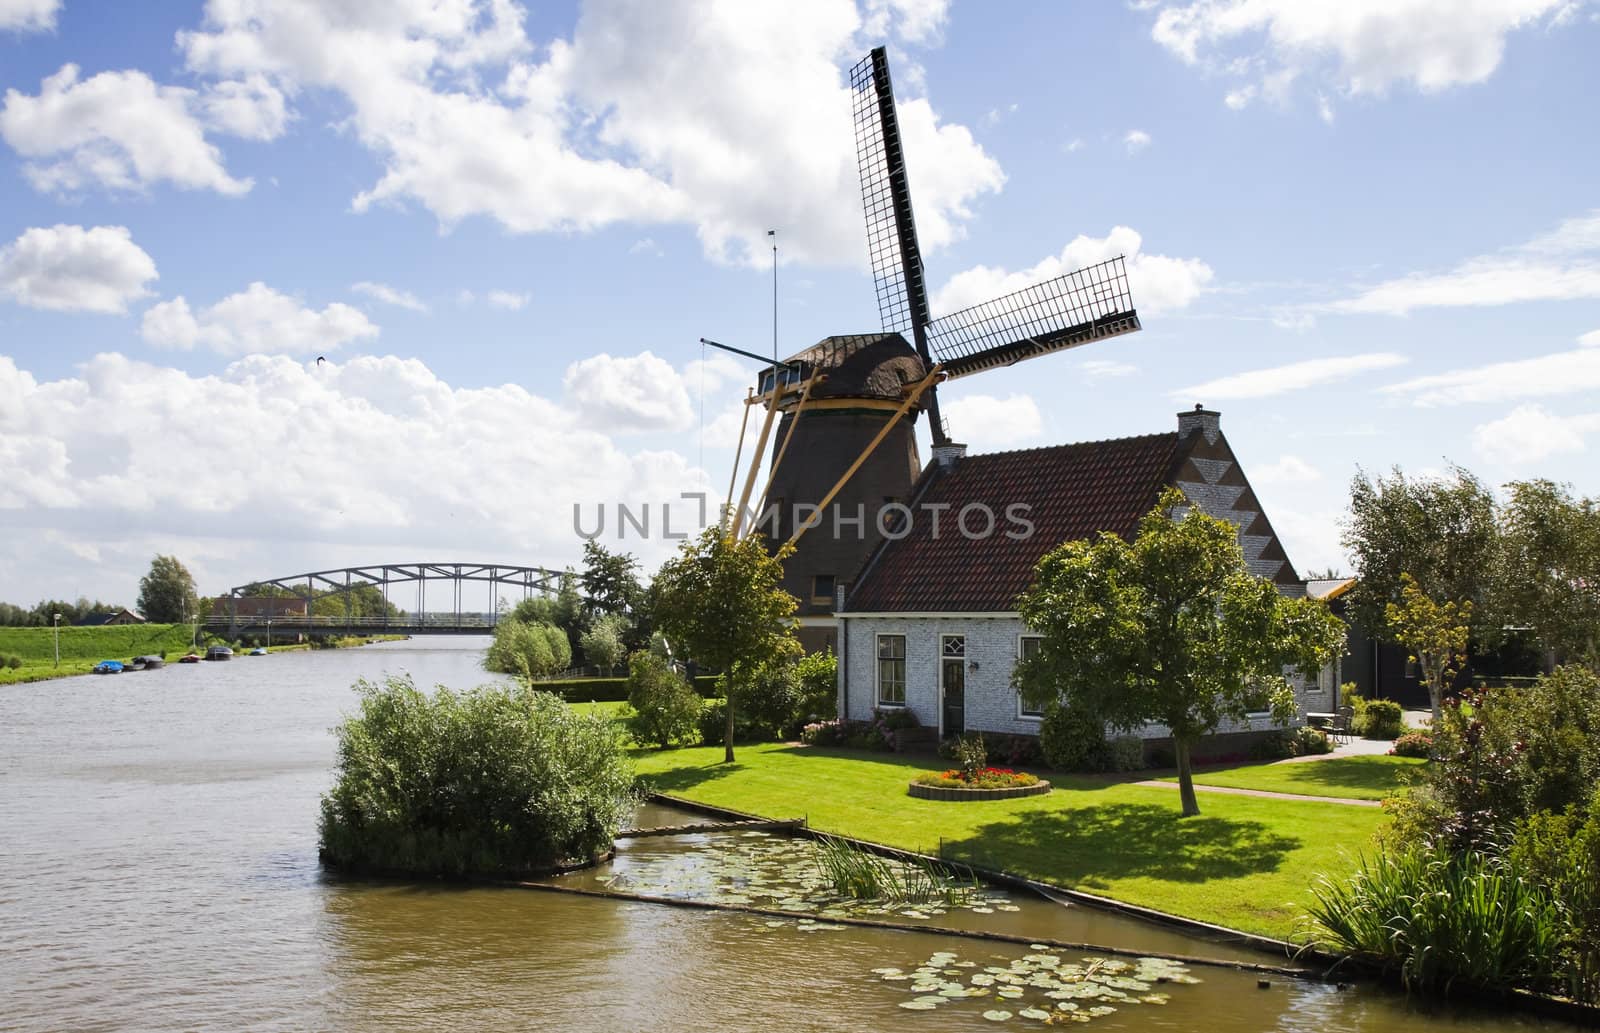 Windmill, house and bridge at the waterside by Colette